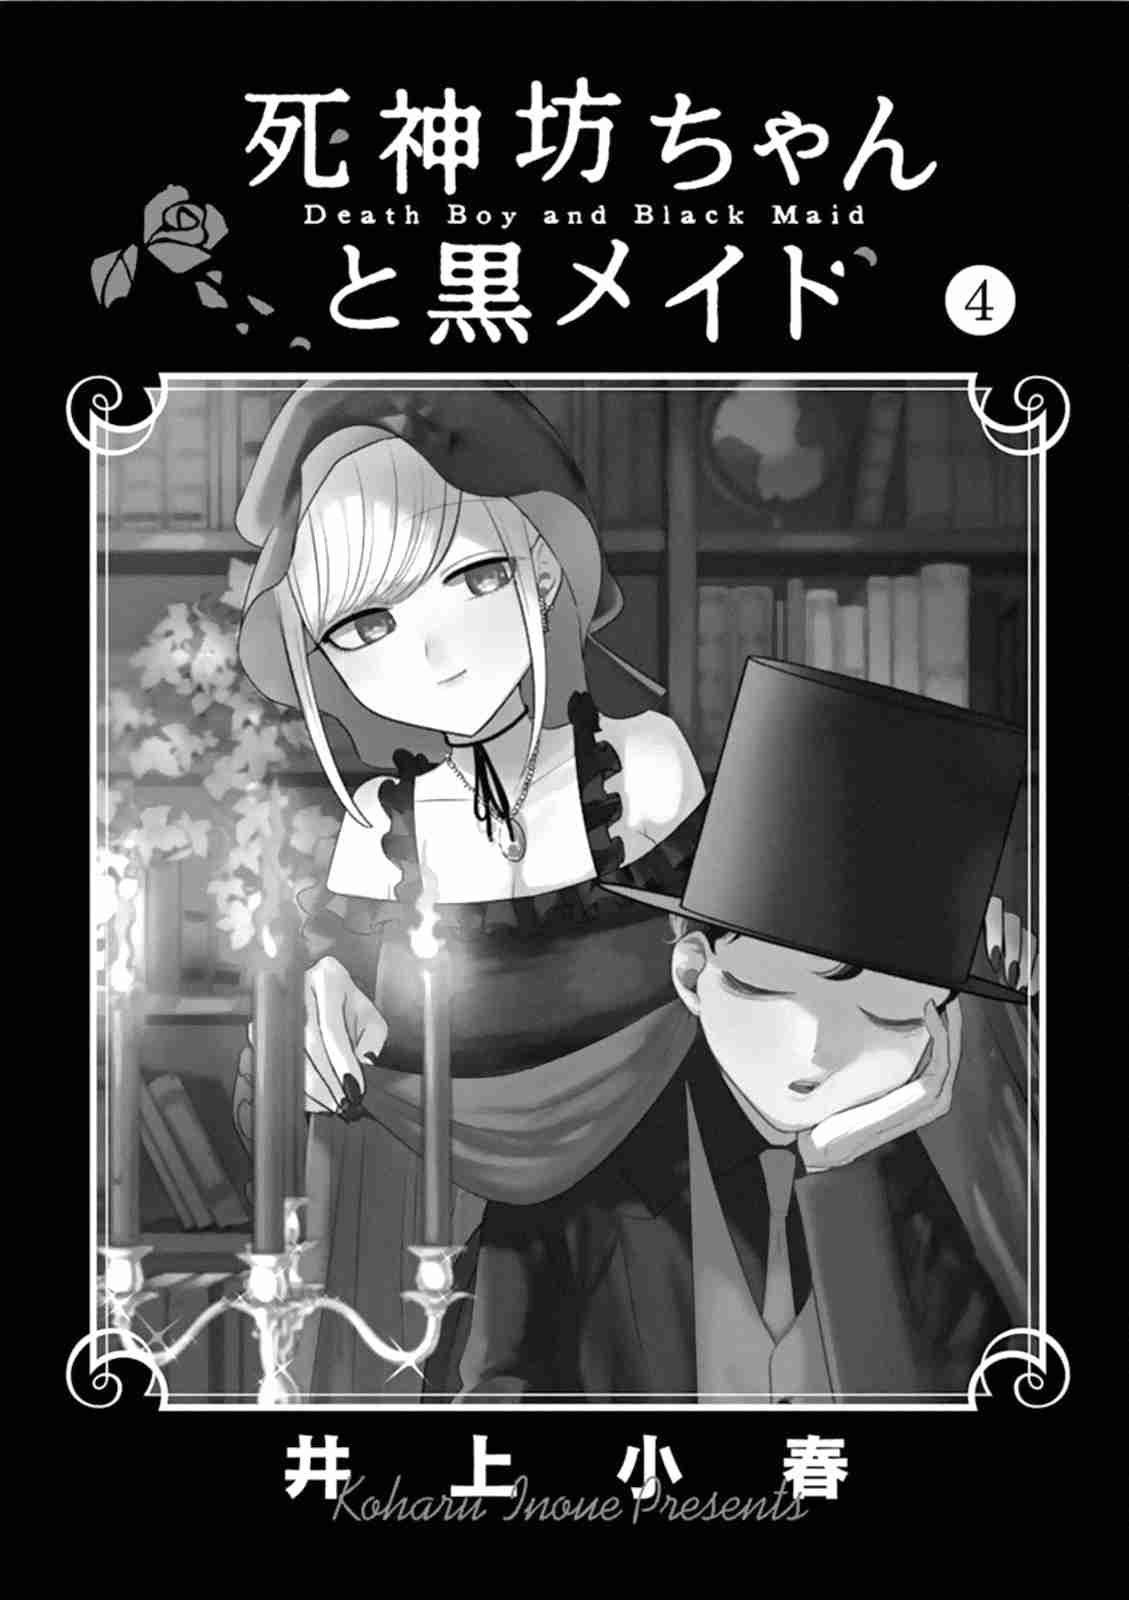 The Duke of Death and His Black Maid Vol. 4 Ch. 54.5 V4 Omake